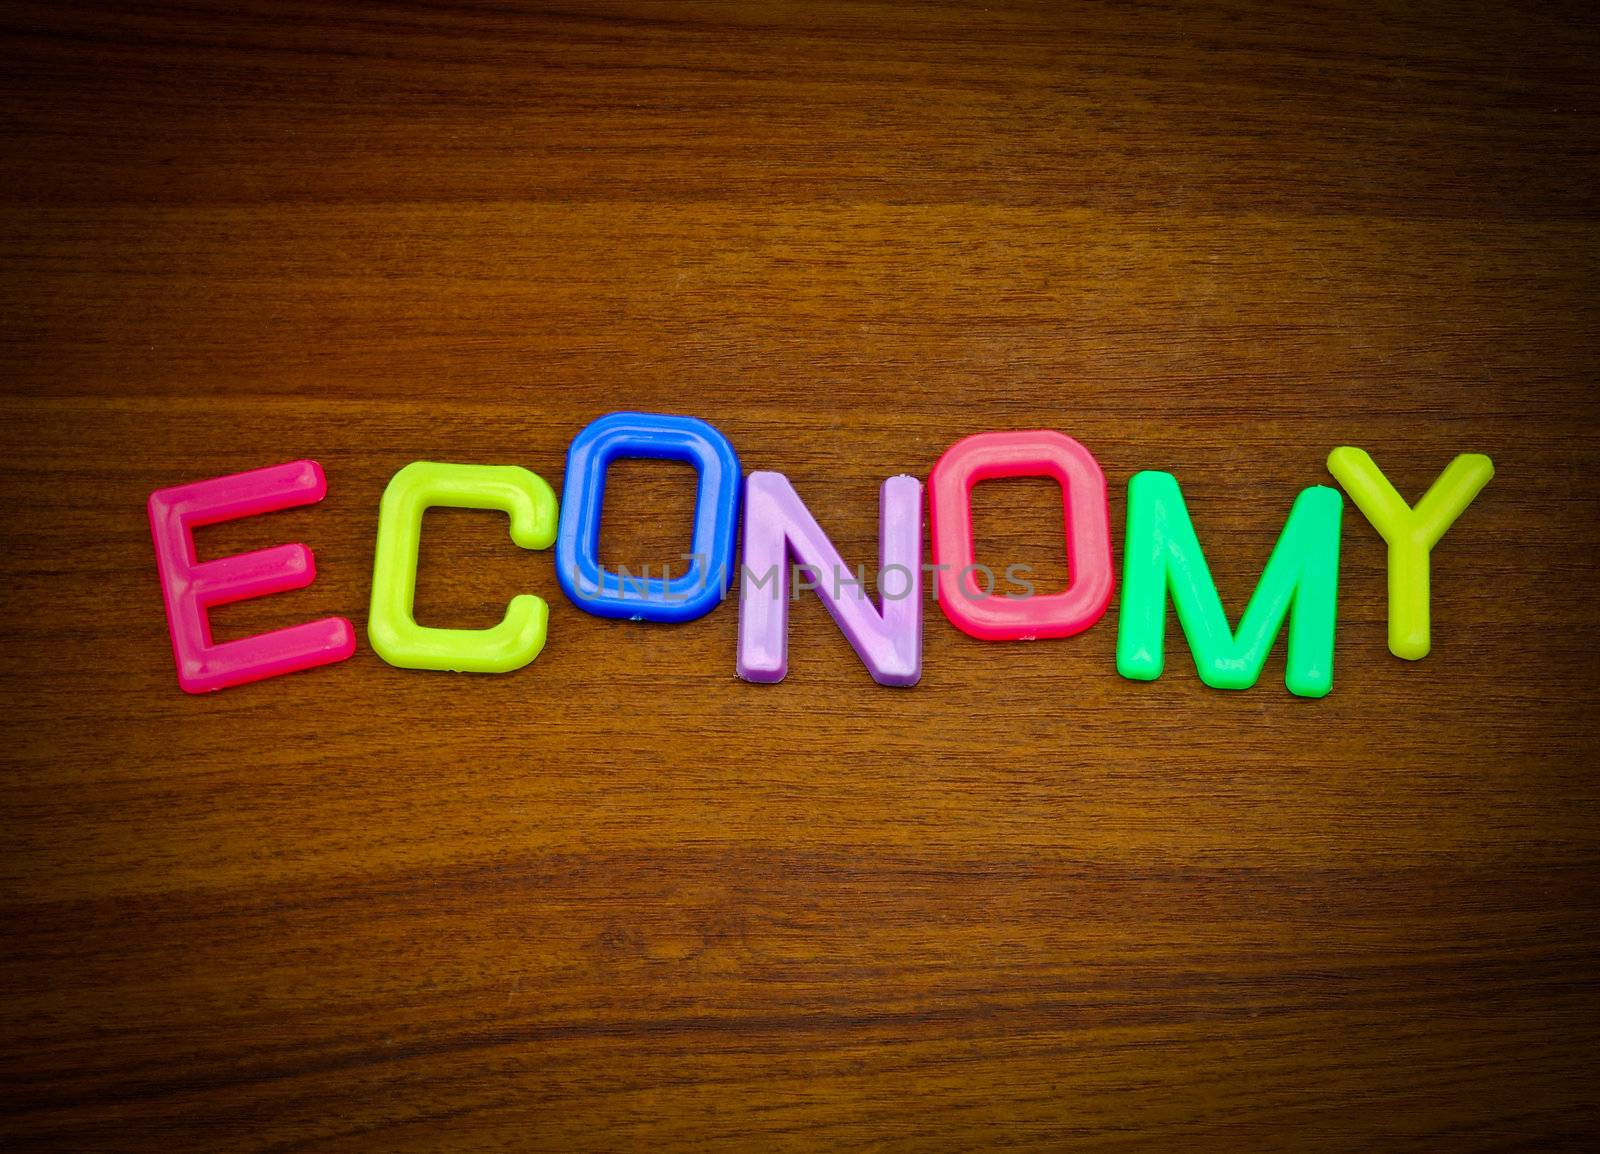 Economy in colorful toy letters on wood background